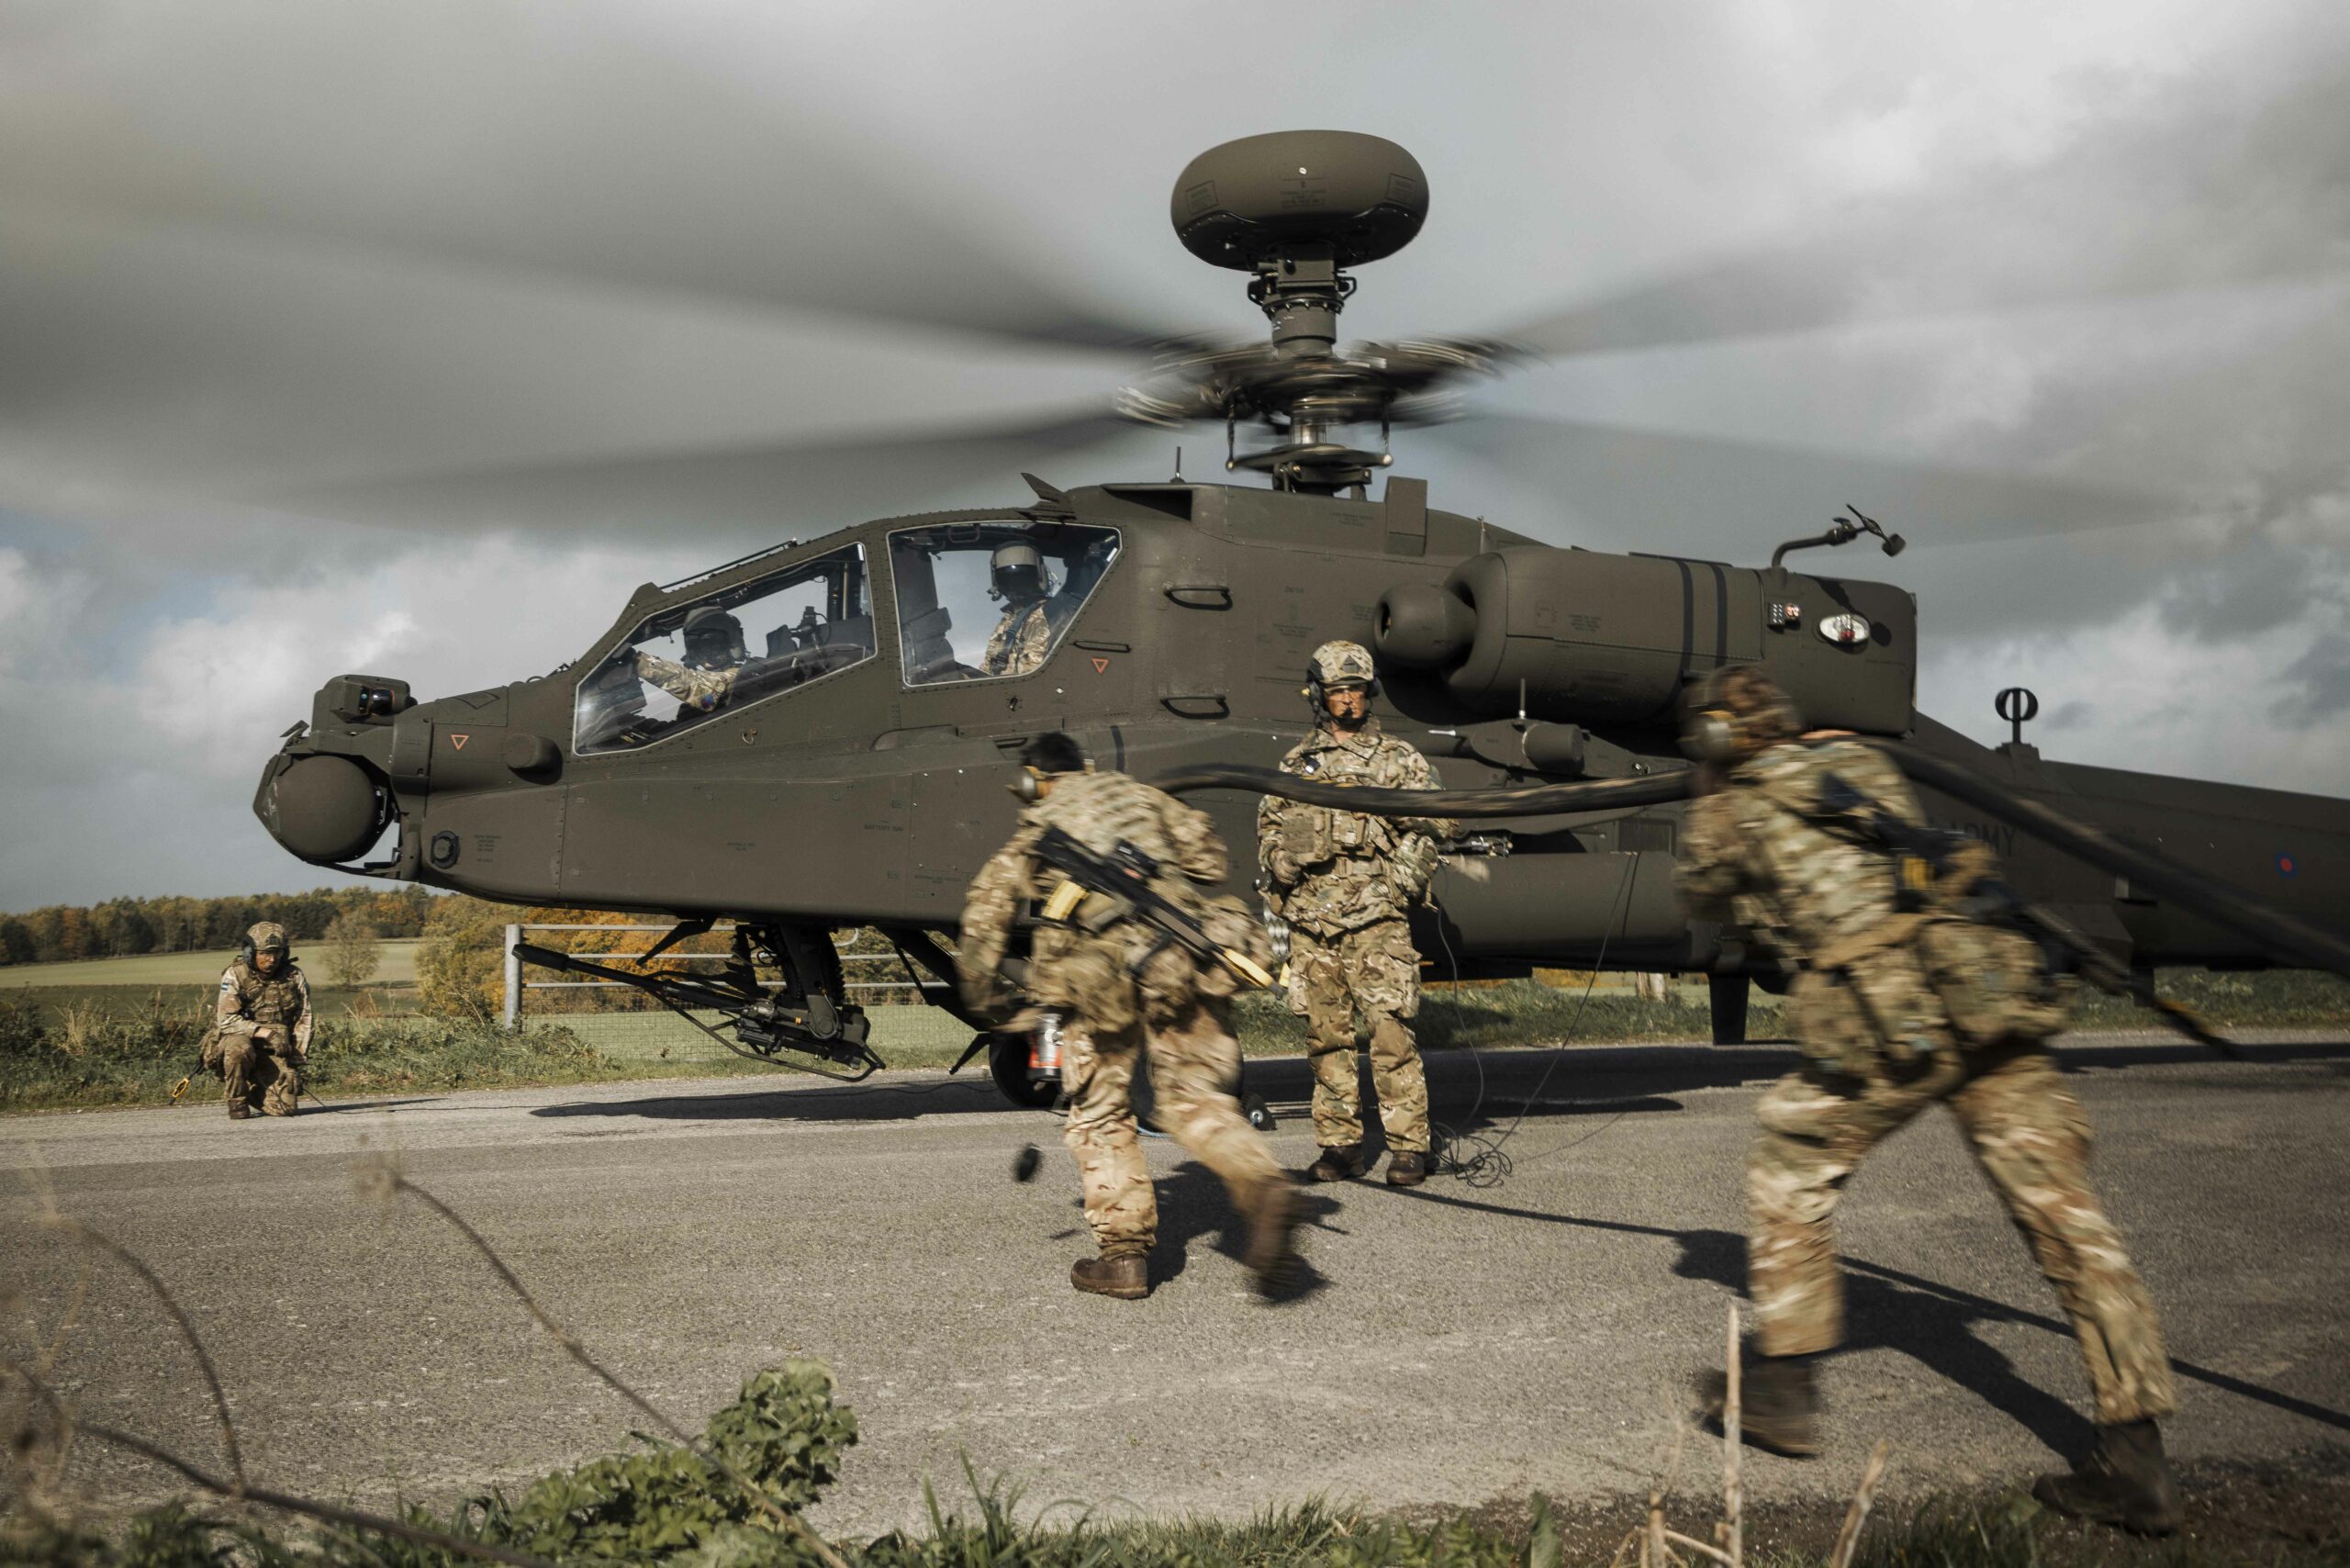 Groundcrew running Forward Arming and Refuelling Points keep the Apache's fuel tanks and weapons pylons full.